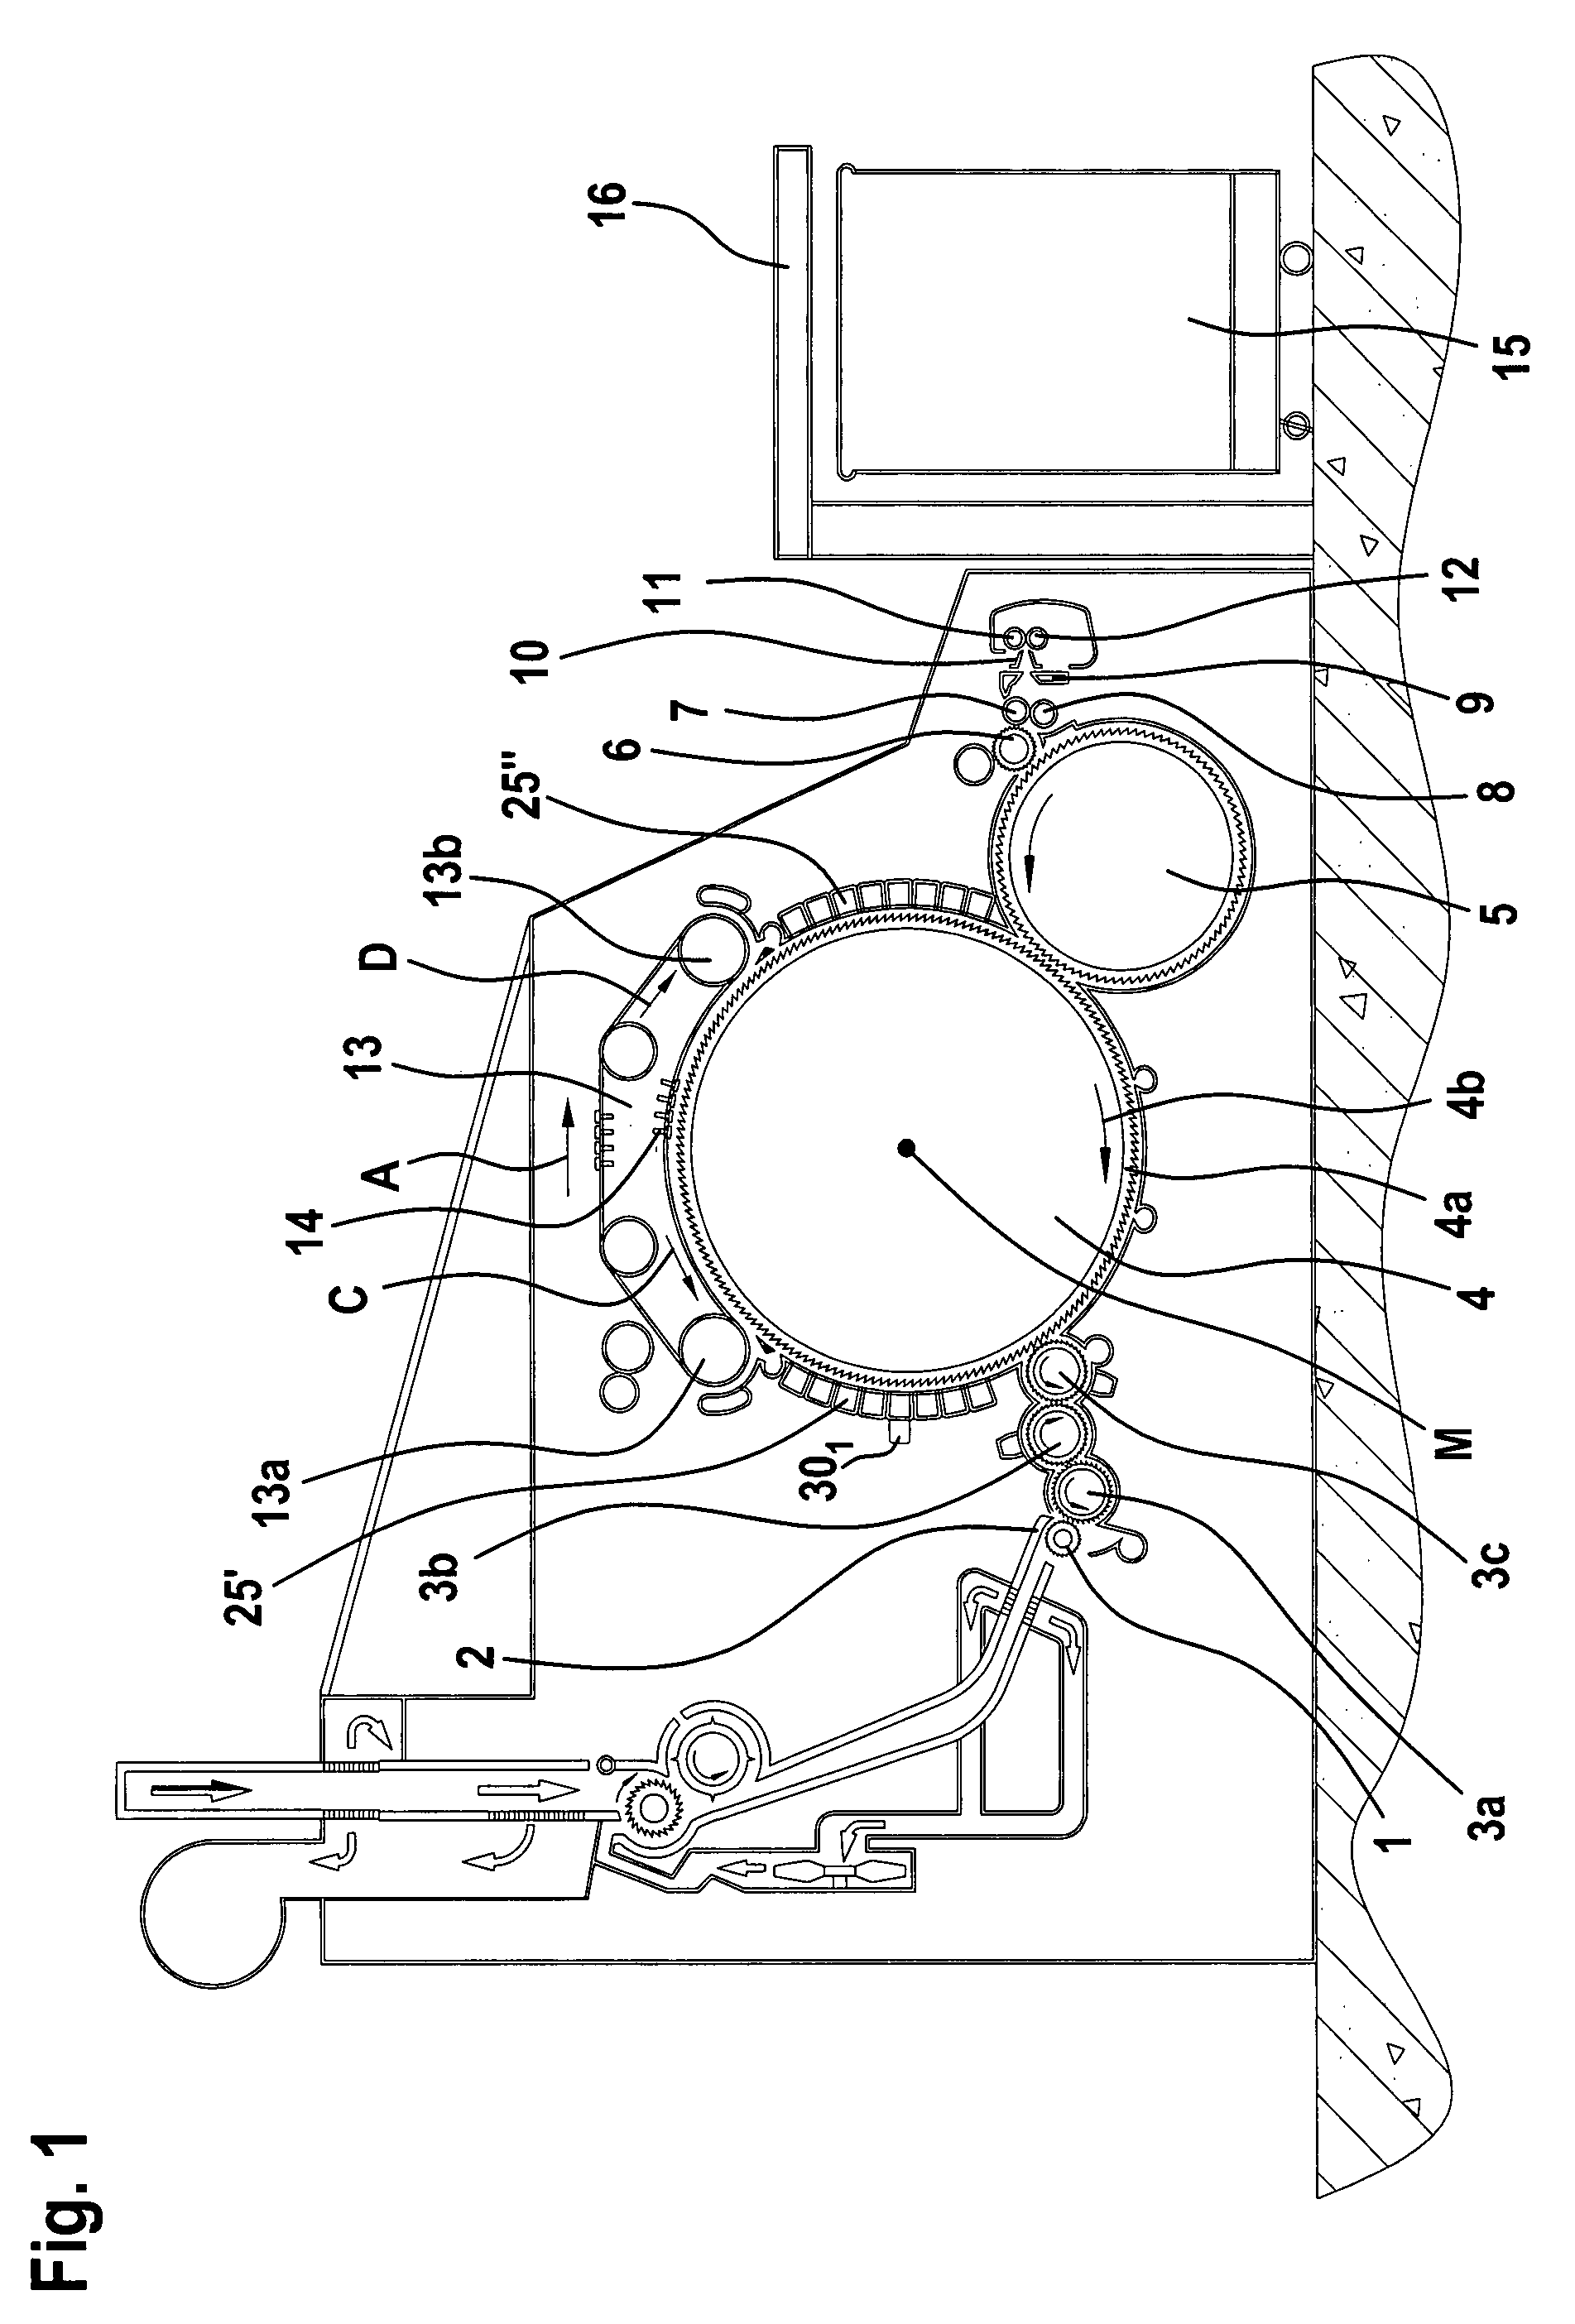 Apparatus at a spinning preparation machine, especially a flat card, roller card or the like, for ascertaining carding process variables